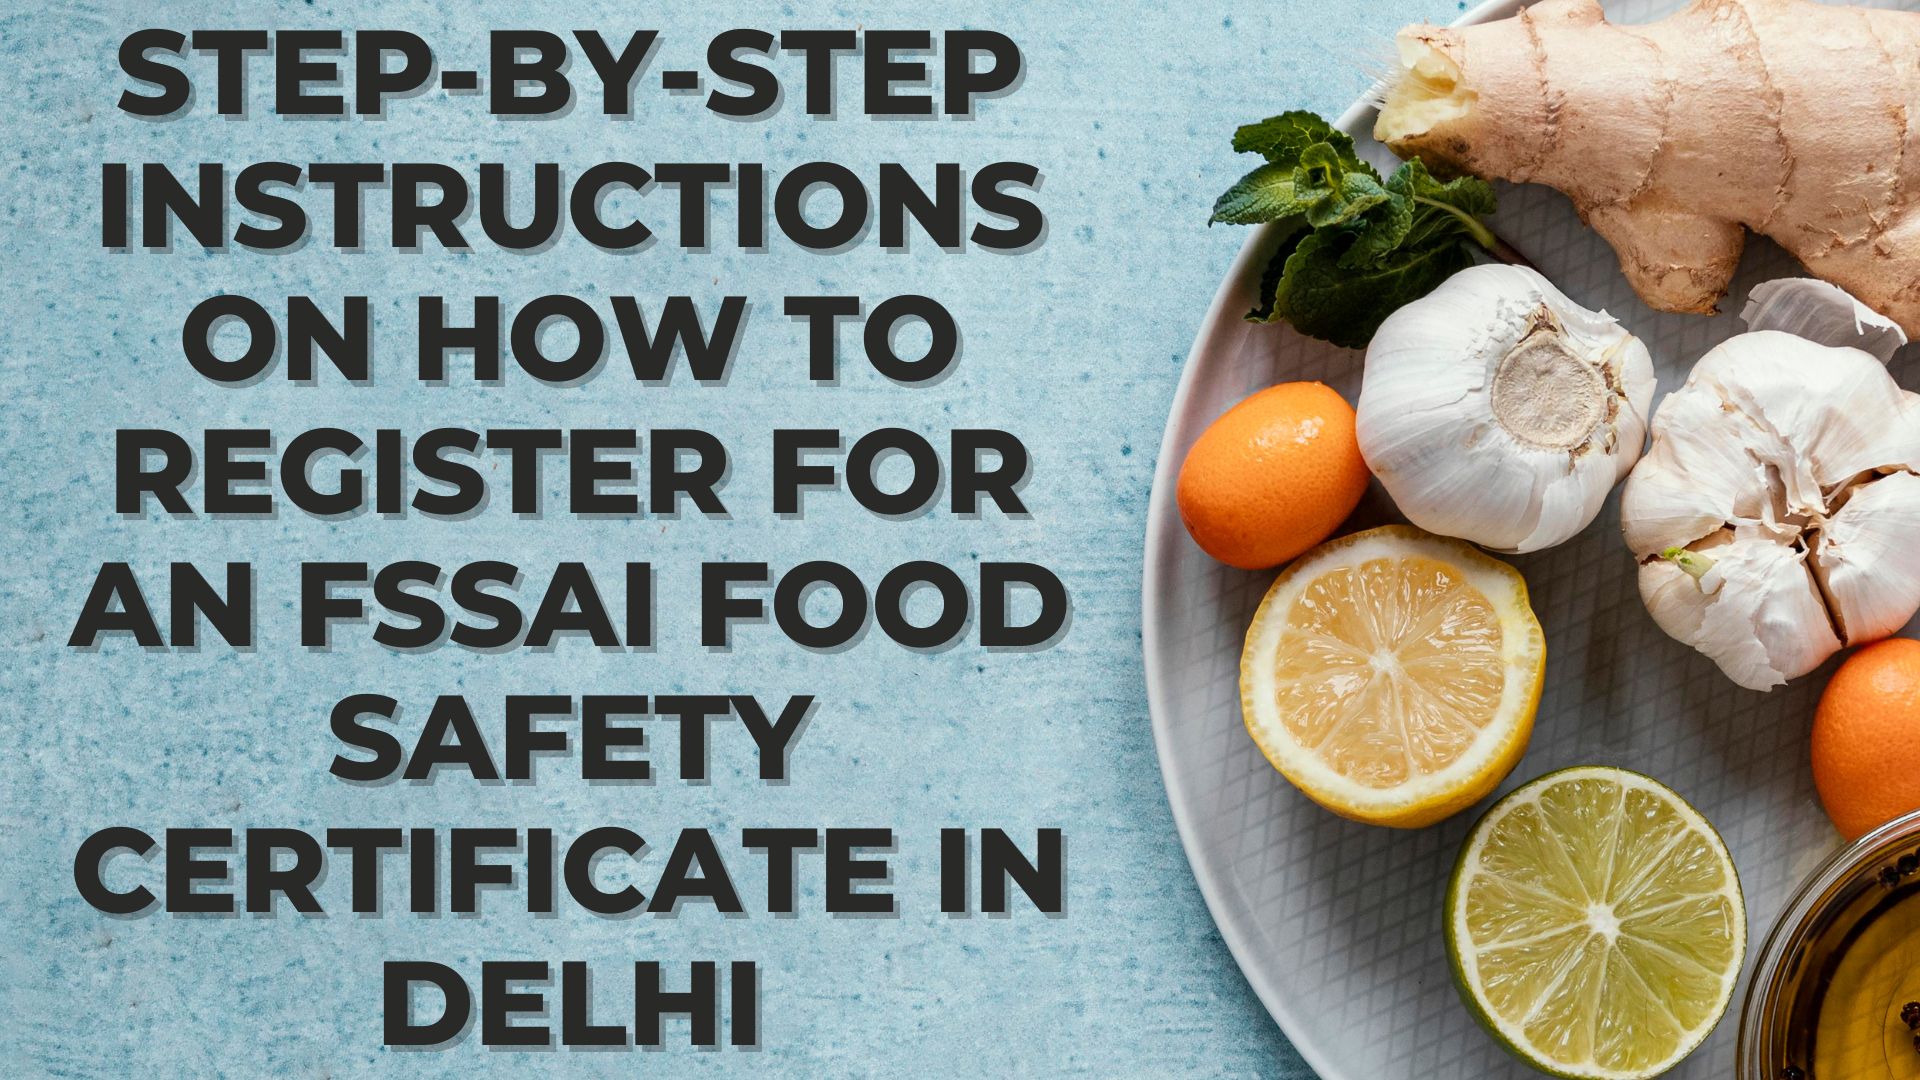 Step-by-step instructions on how to register for an FSSAI food safety certificate in Delhi